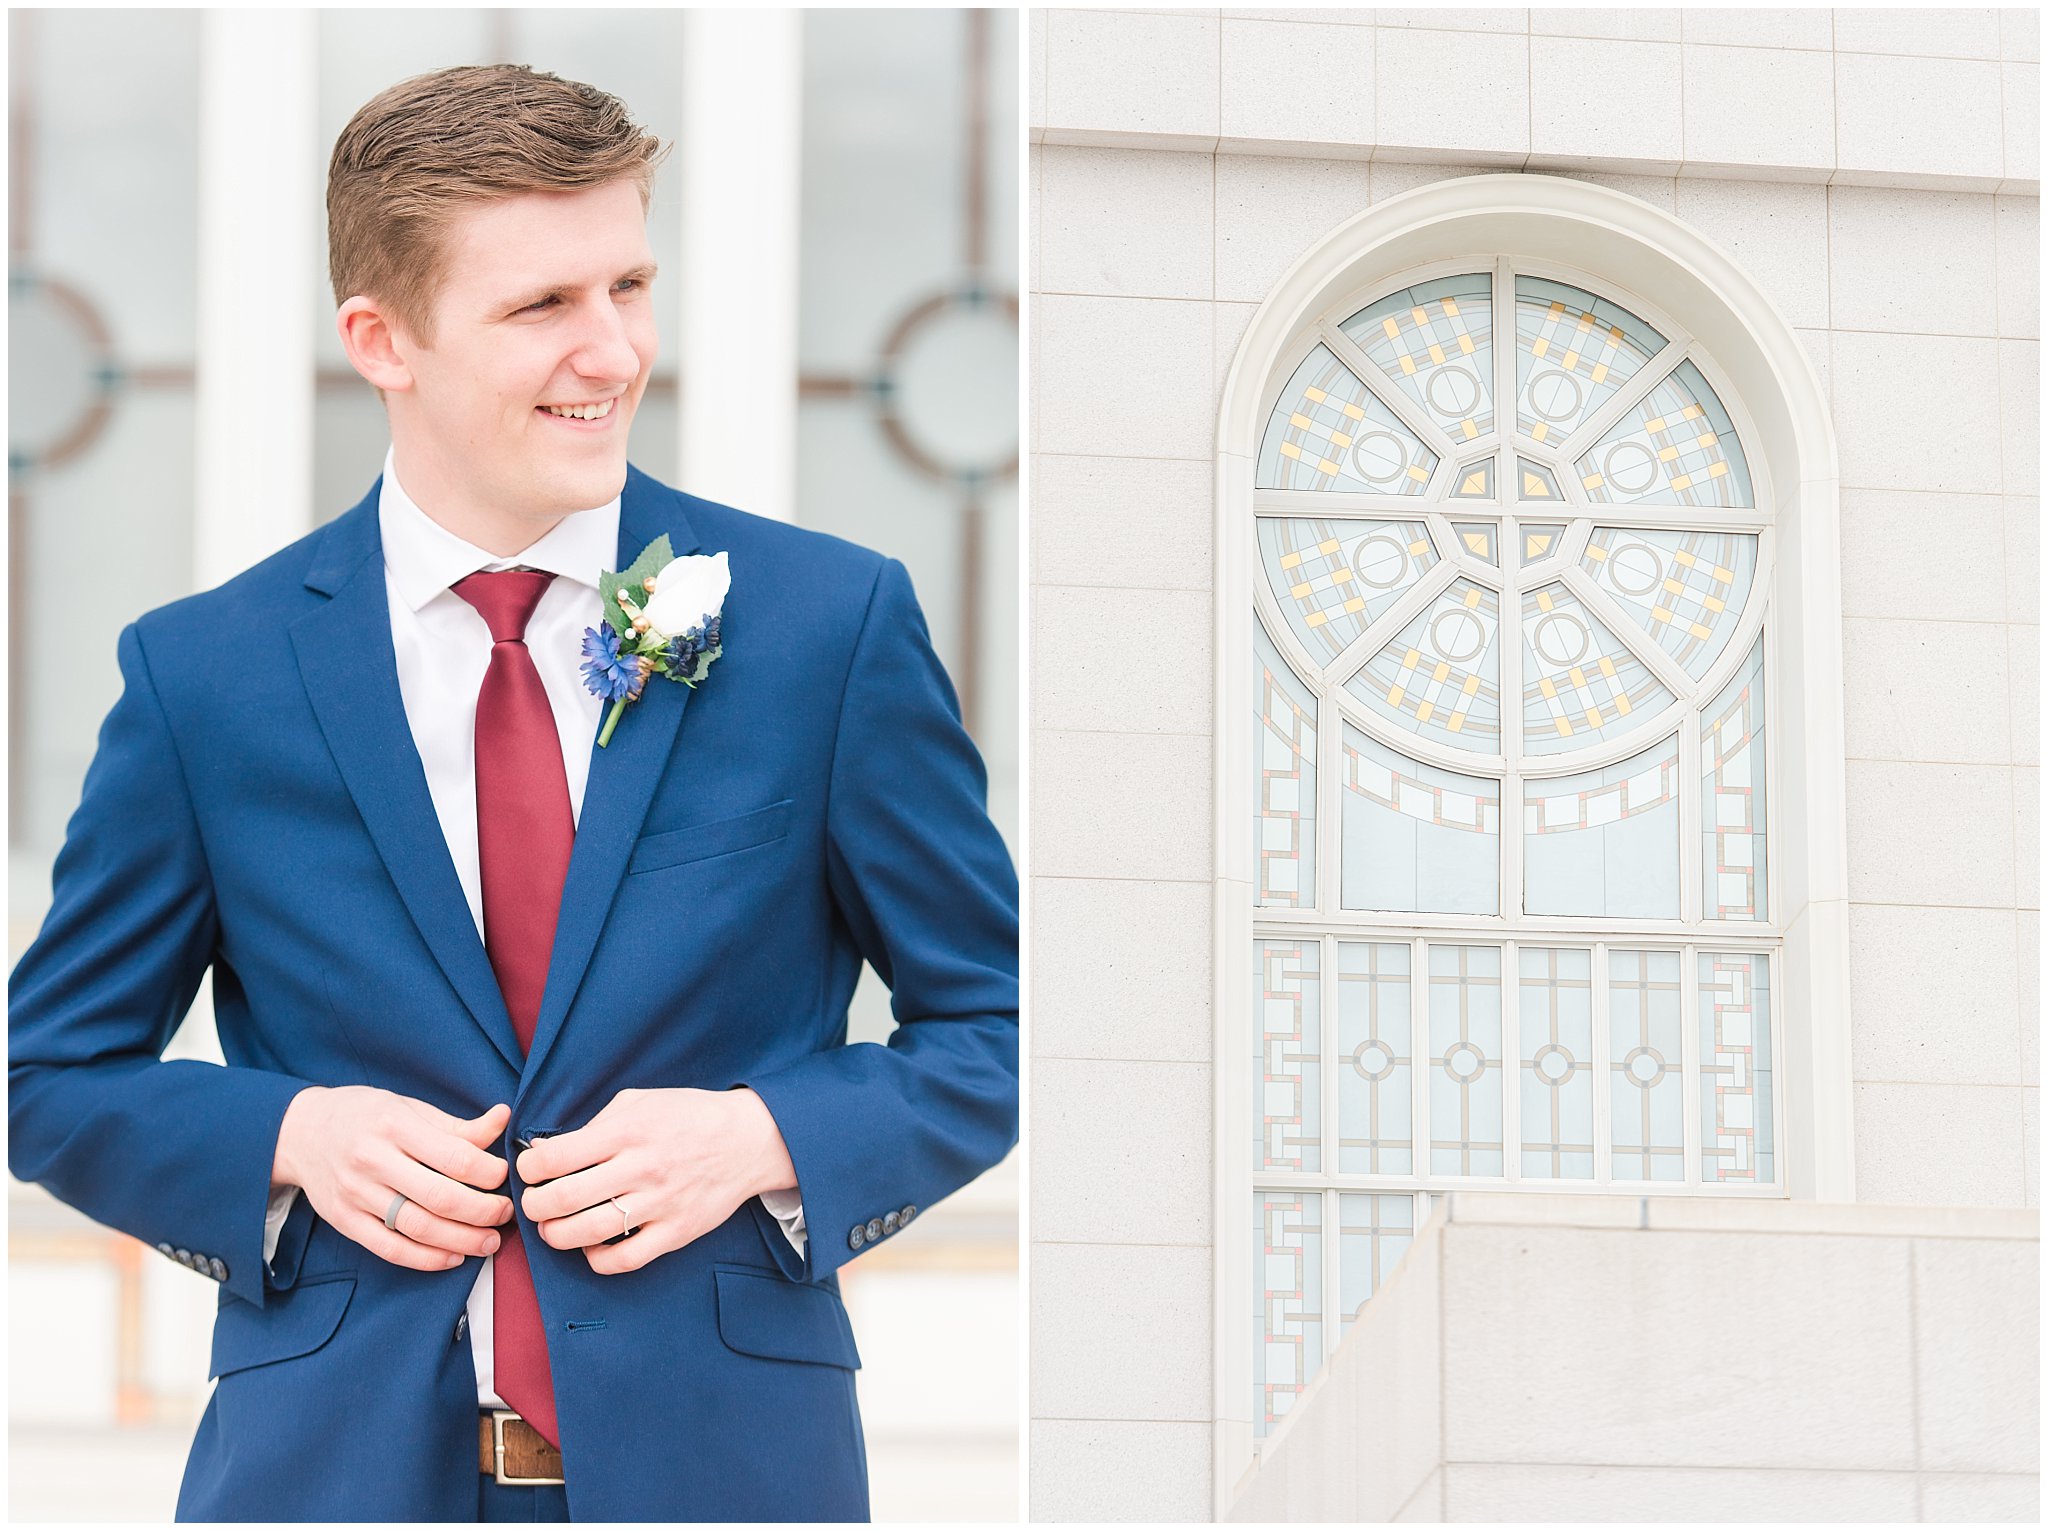 Groom portrait with blue suit and burgundy tie during winter wedding | Bountiful Temple Wedding and Joseph Smith Memorial Reception | Jessie and Dallin Photography